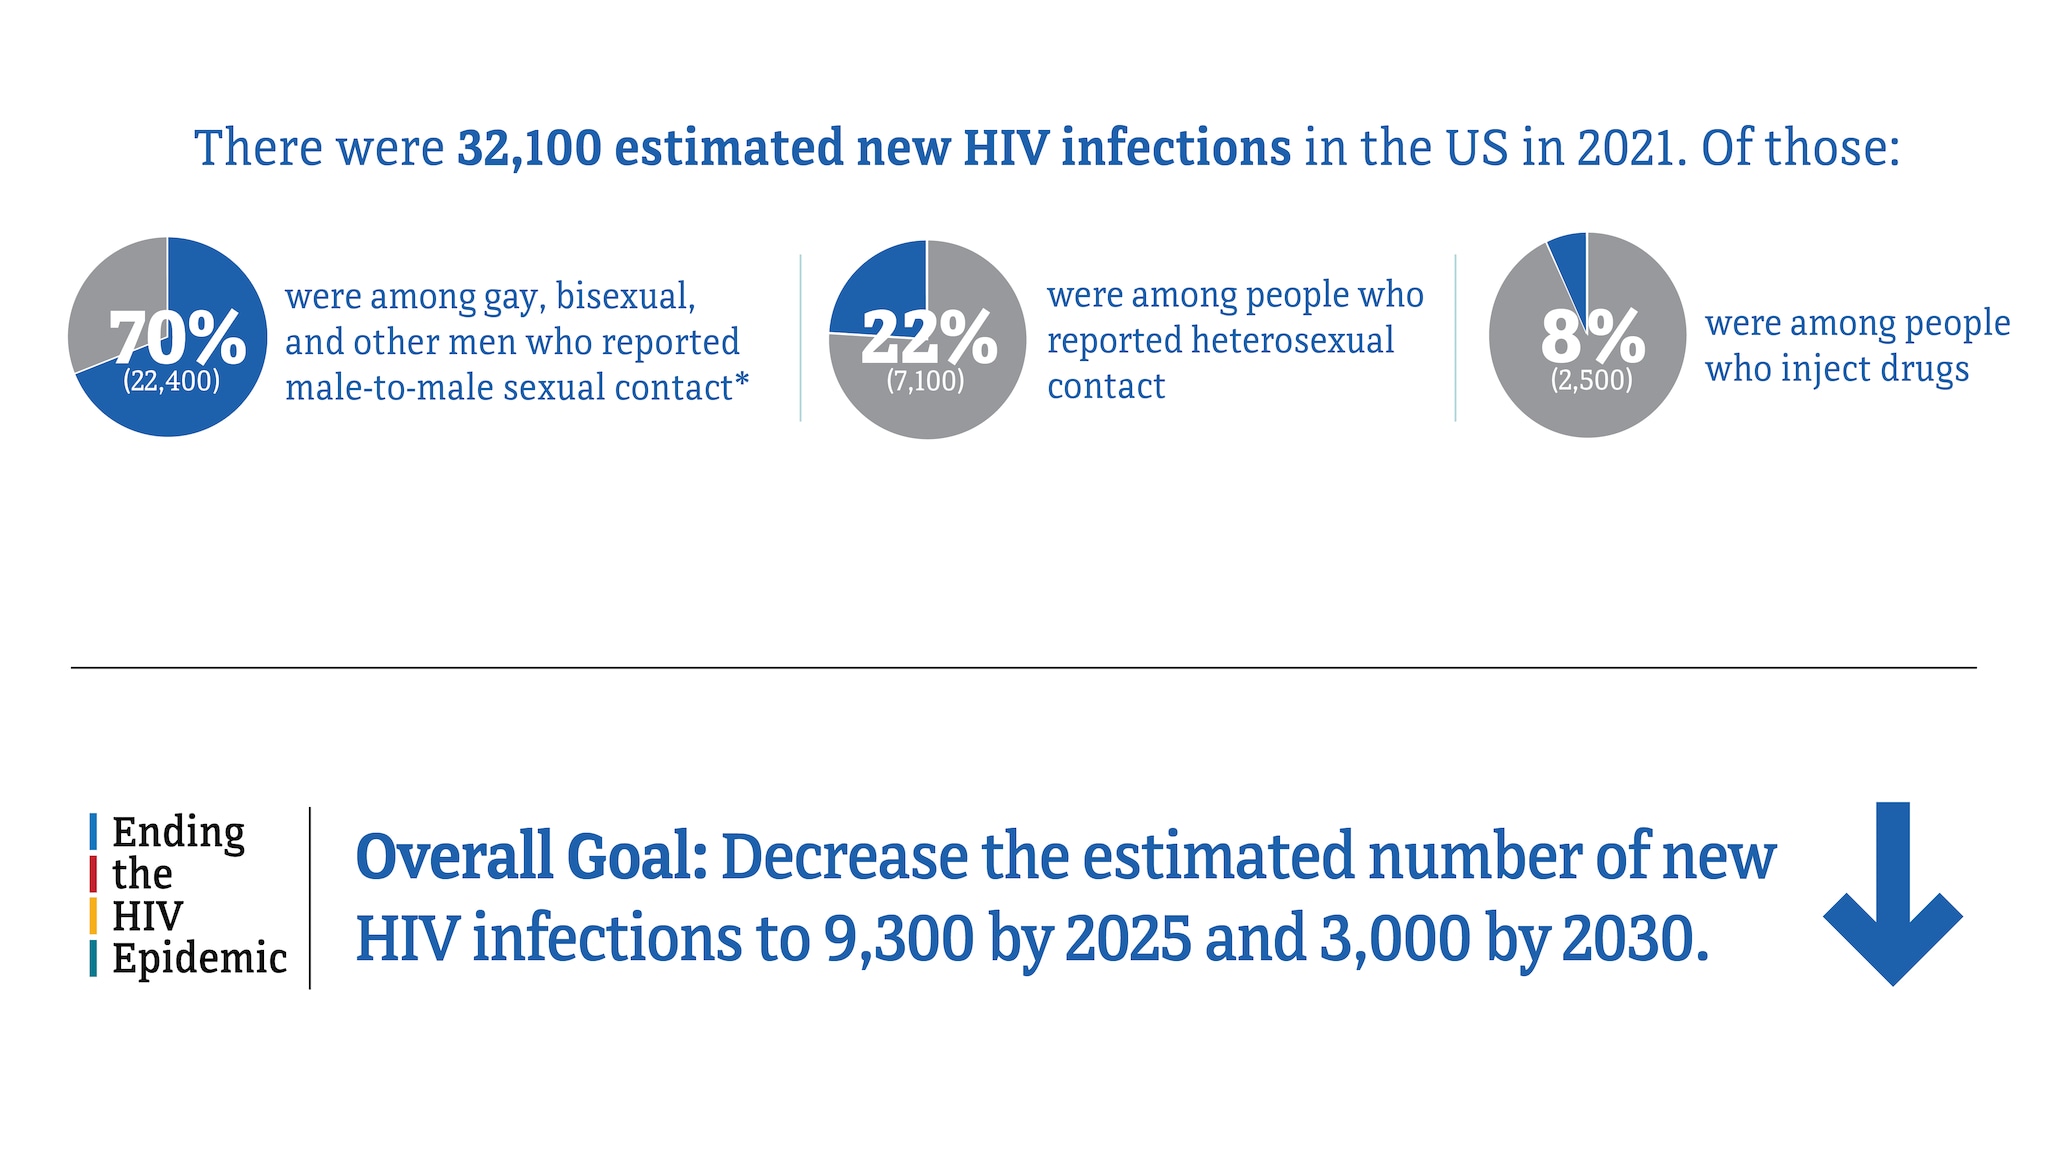 There were 32,100 estimated new HIV infections in the US in 2021. Of those, 70 percent were among gay, bisexual, and other men who reported male-to-male sexual contact, 22 percent were among people who reported heterosexual contact, and 8 percent were among people who inject drugs. The Ending the HIV Epidemic overall goal is to decrease the estimated number of new HIV infections to 9,300 by 2025 and 3,000 by 2030.